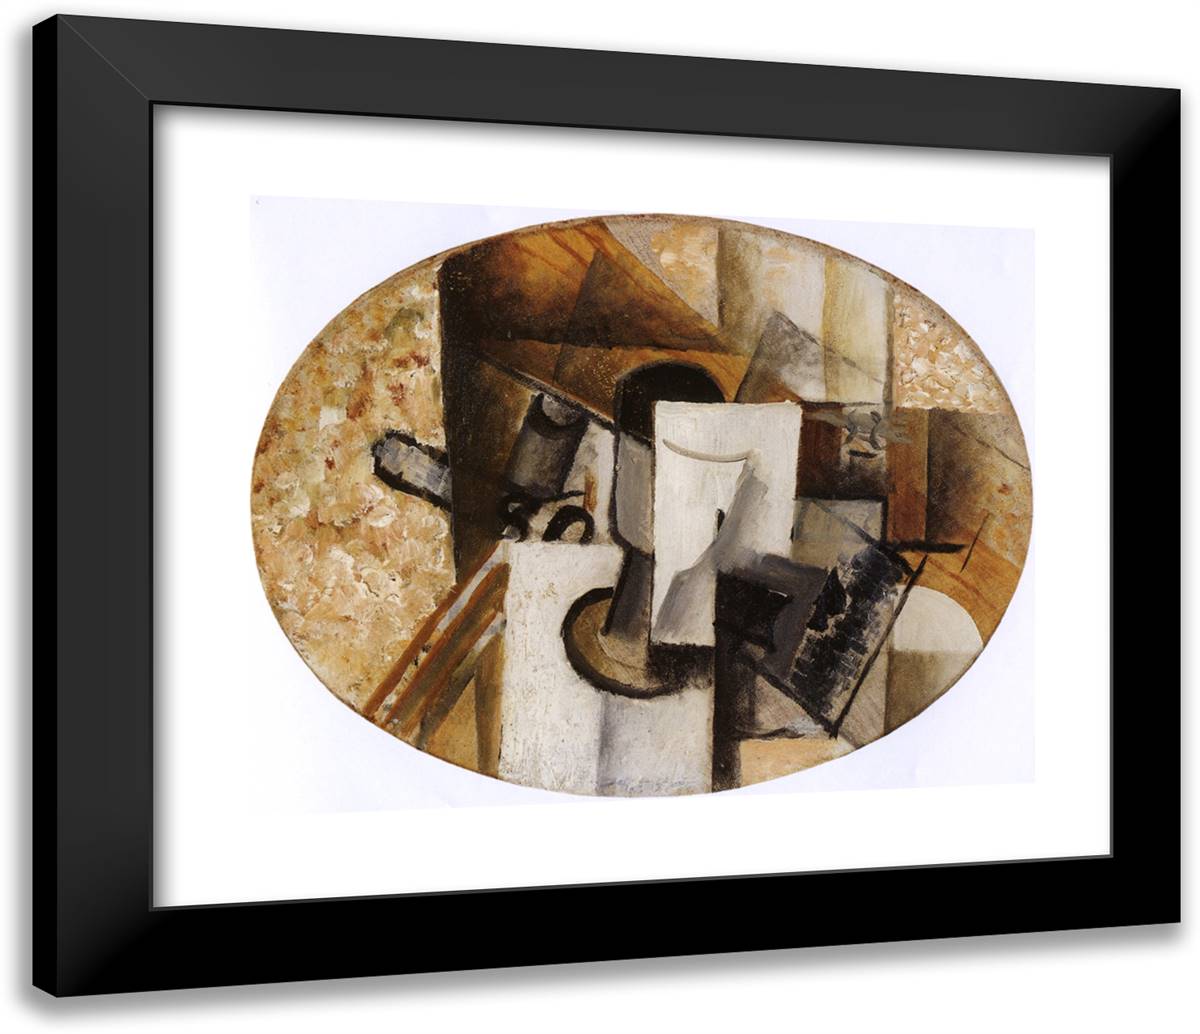 Glass and Card 23x20 Black Modern Wood Framed Art Print Poster by Braque, Georges